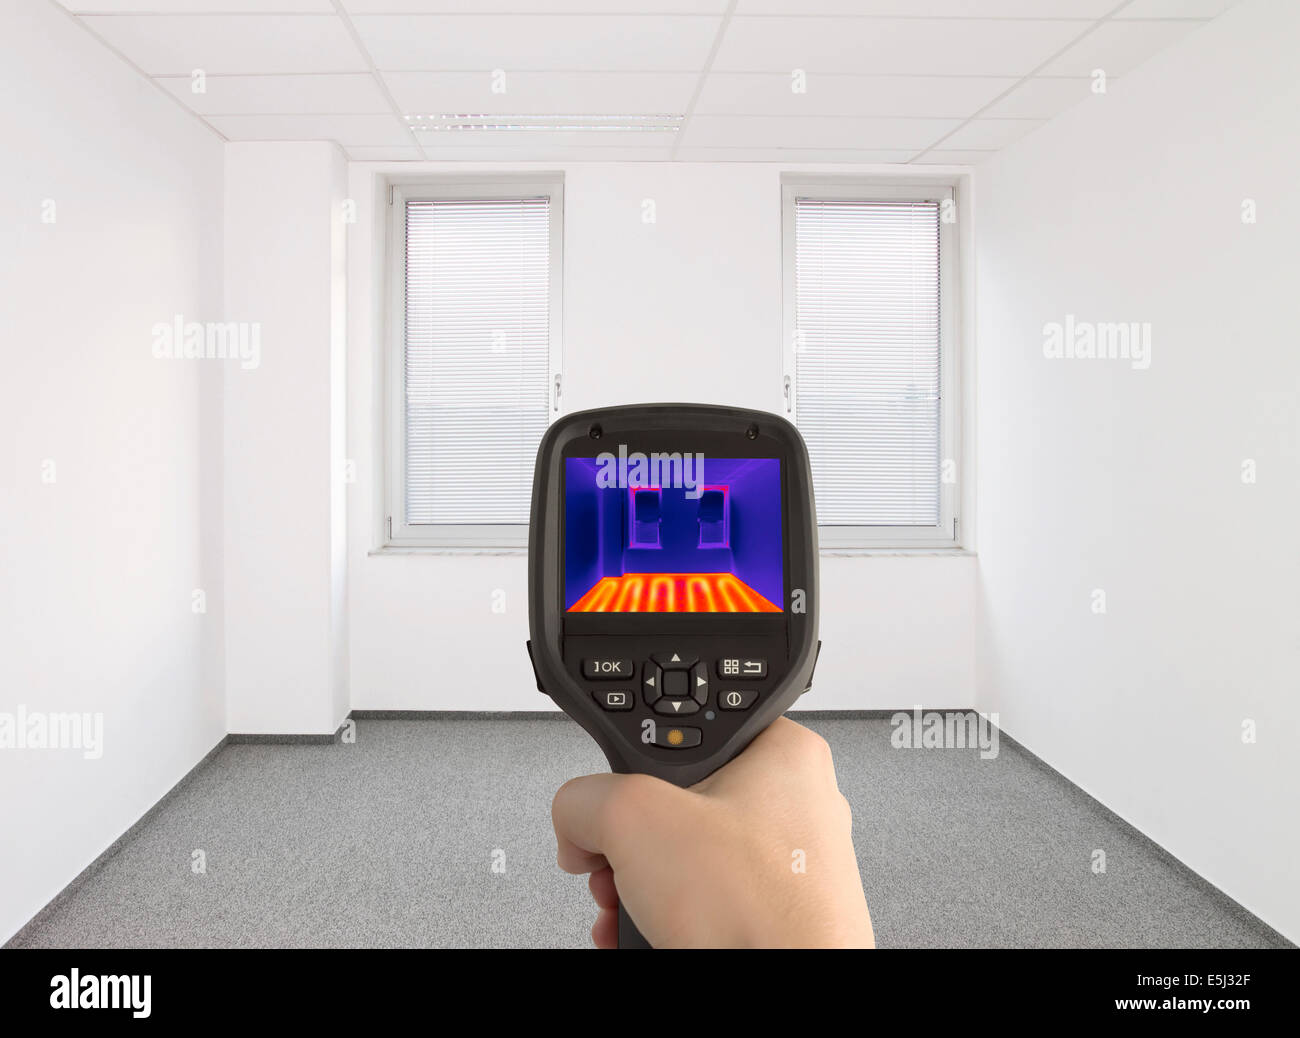 Controlling Underfloor Heating with Thermal Camera Stock Photo